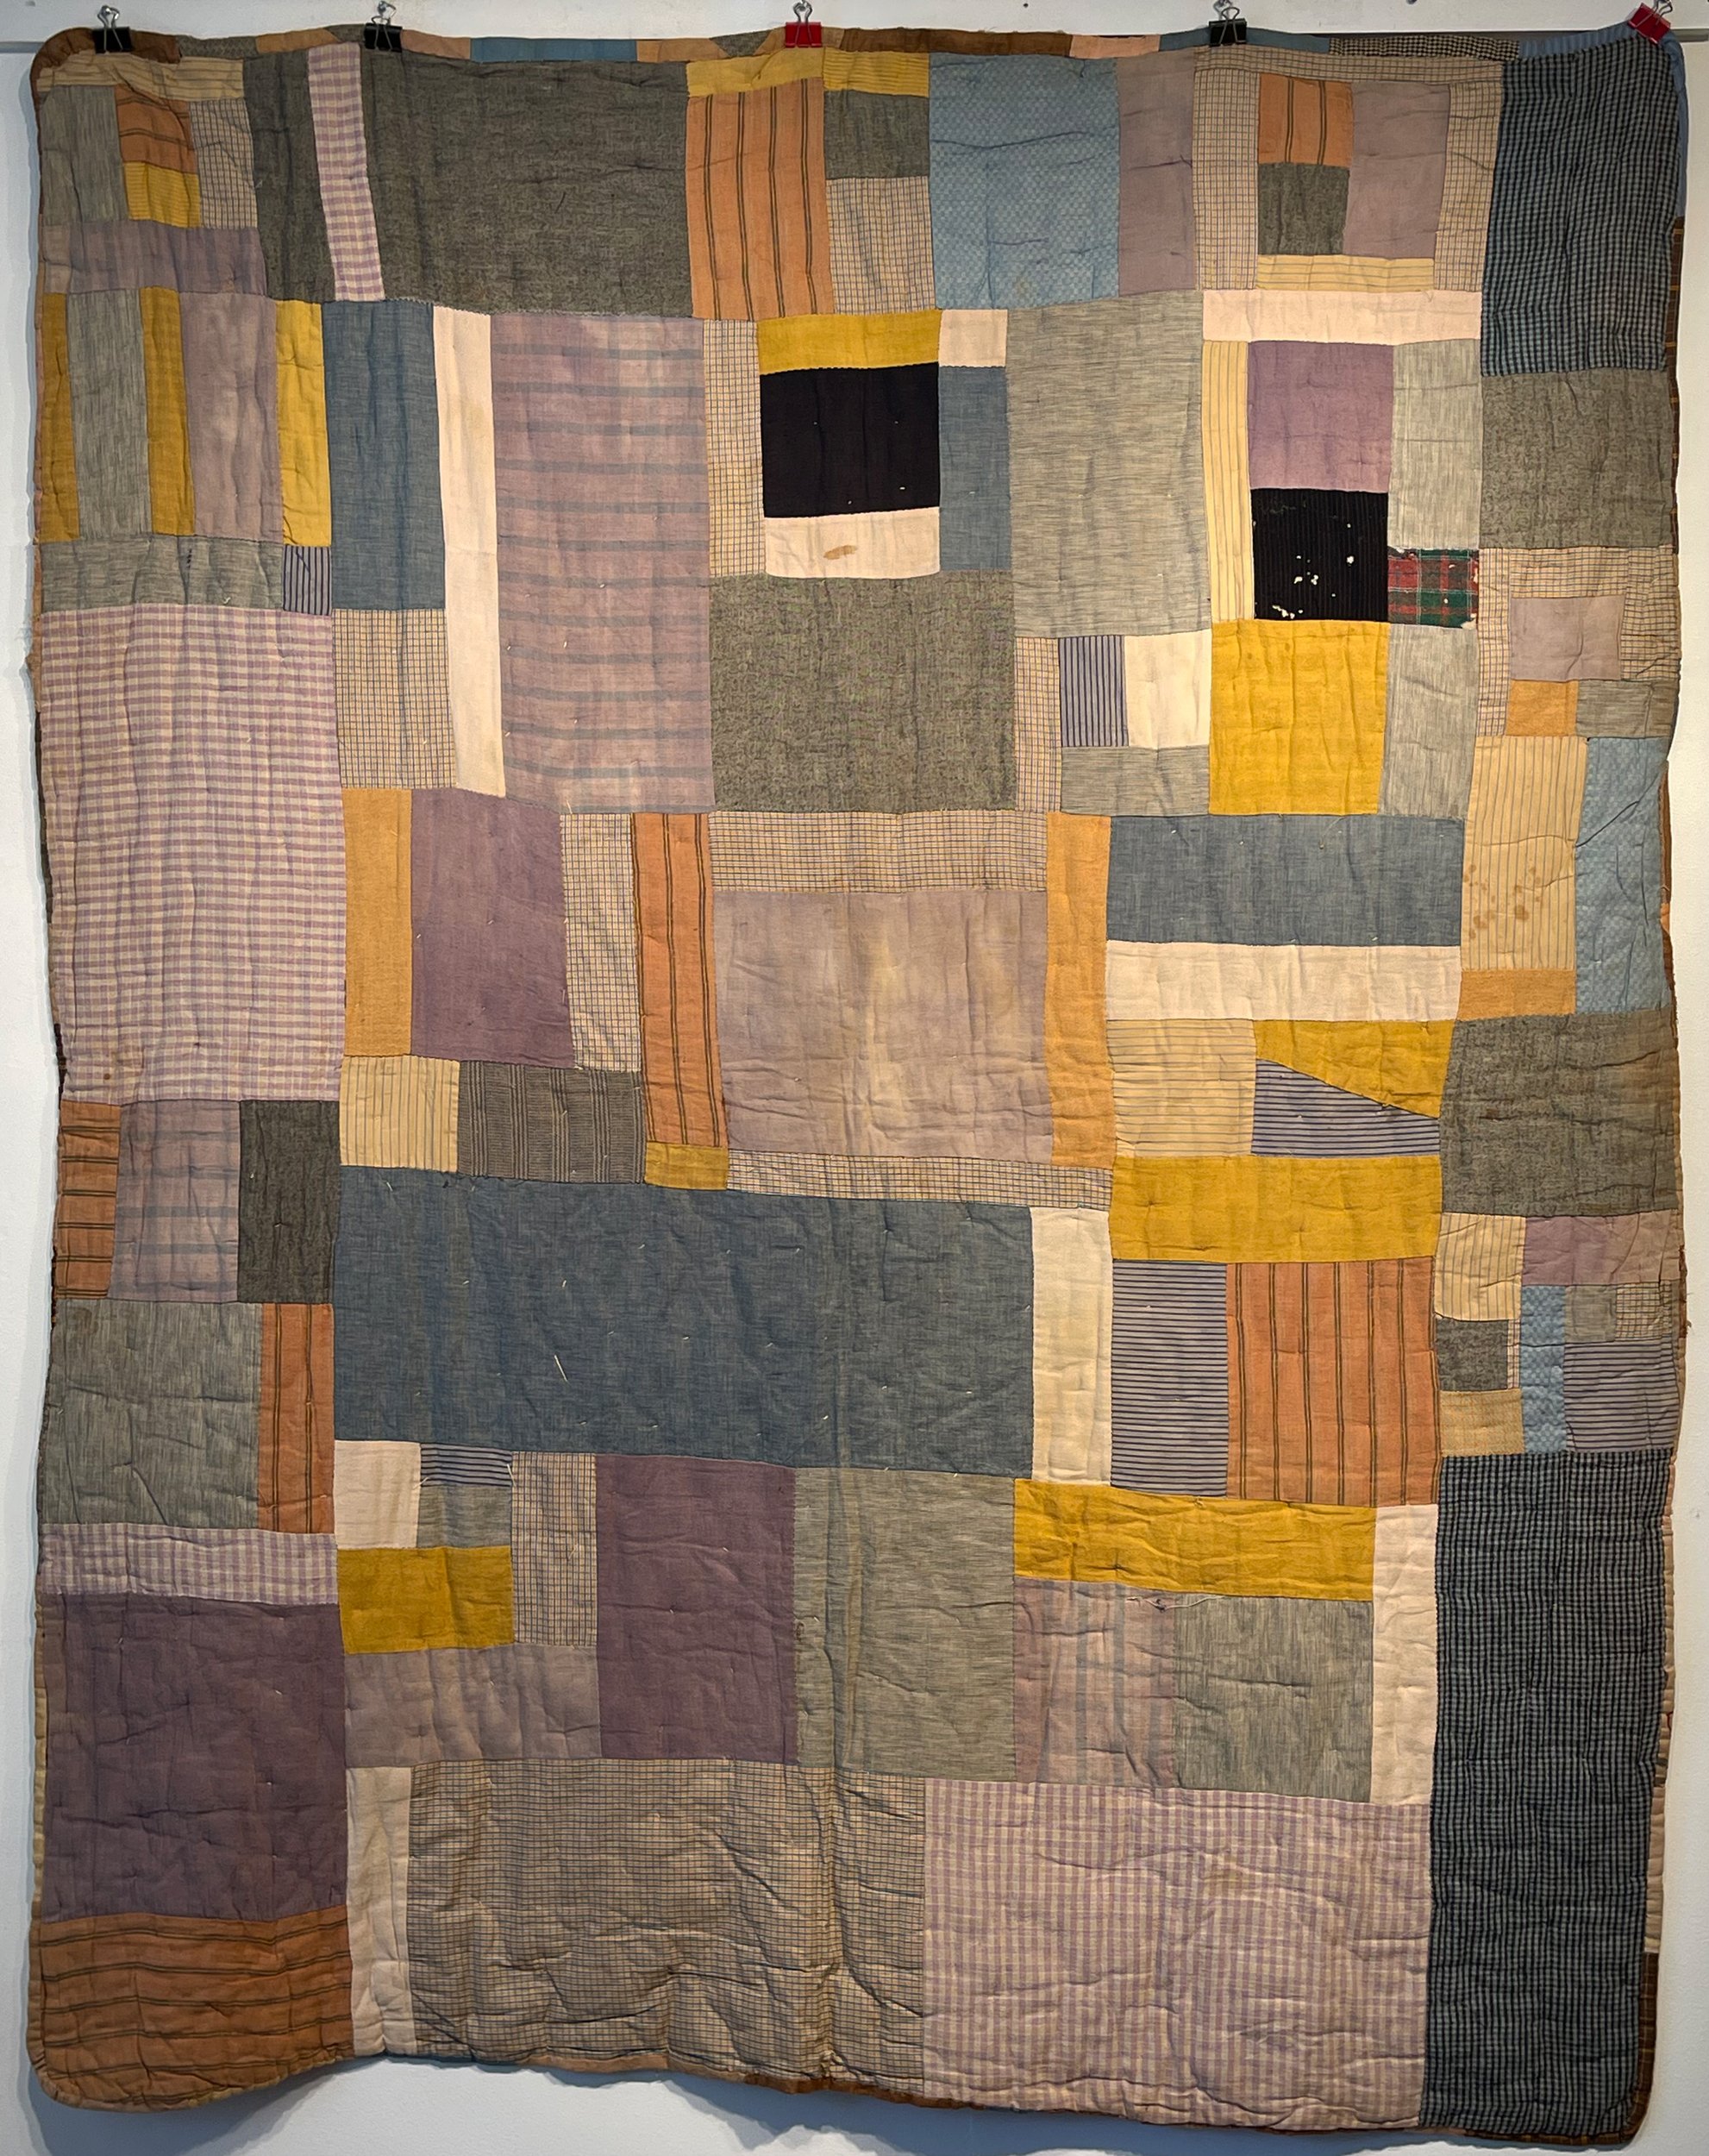   #155    Improvisational two-sided tied quilt, ca. 1930s   74” x 58”  Machine-pieced   (CLICK ON THIS PHOTO TO SEE THE OTHER SIDE IN A SEPARATE WINDOW)     ASK ABOUT THIS QUILT   